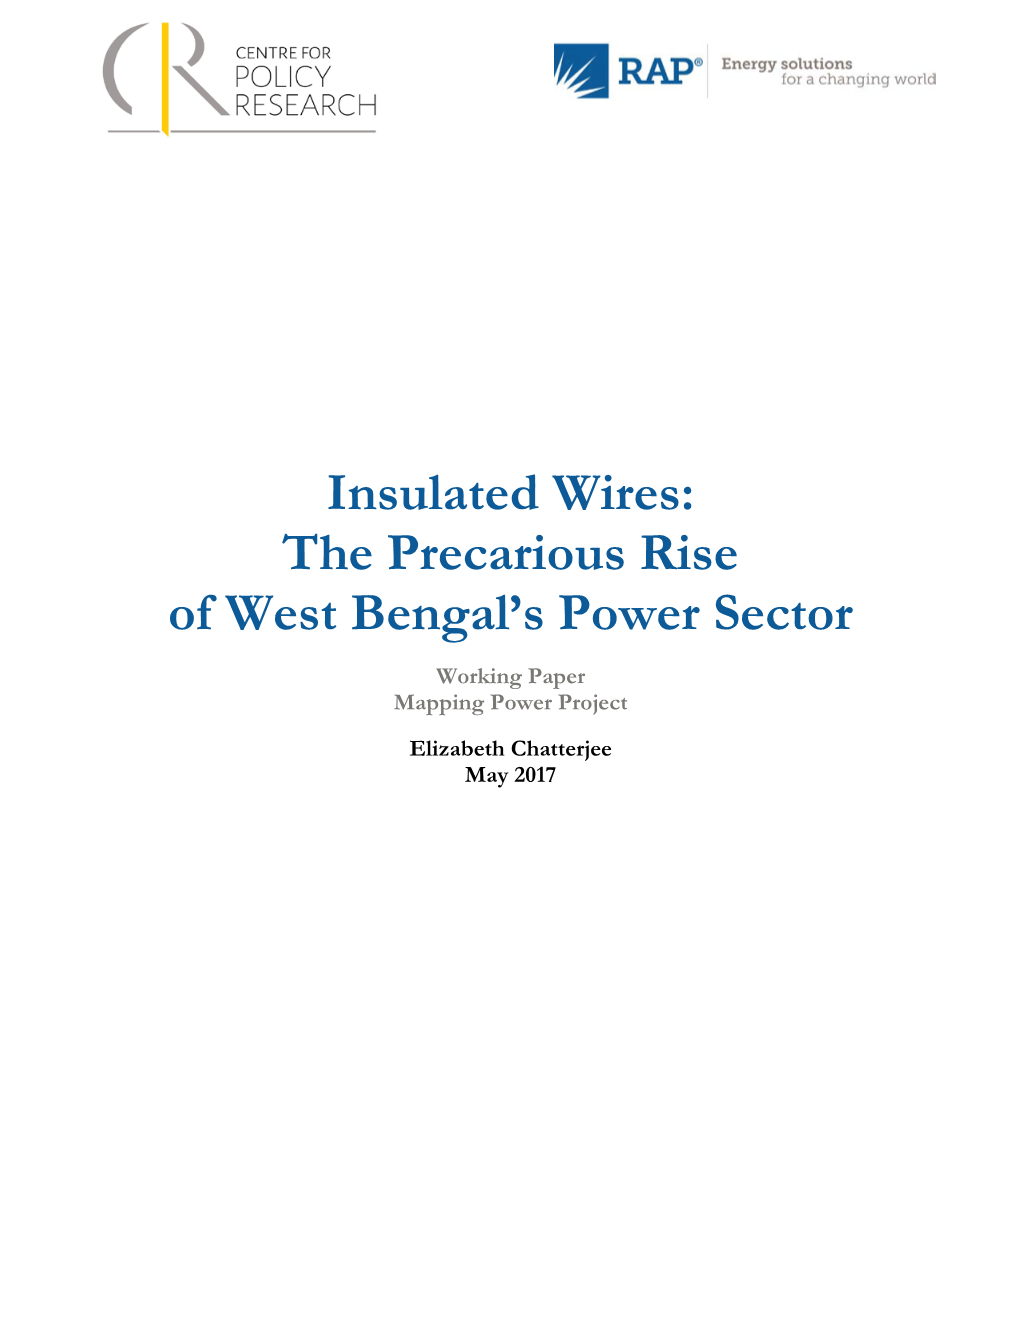 Insulated Wires: the Precarious Rise of West Bengal's Power Sector